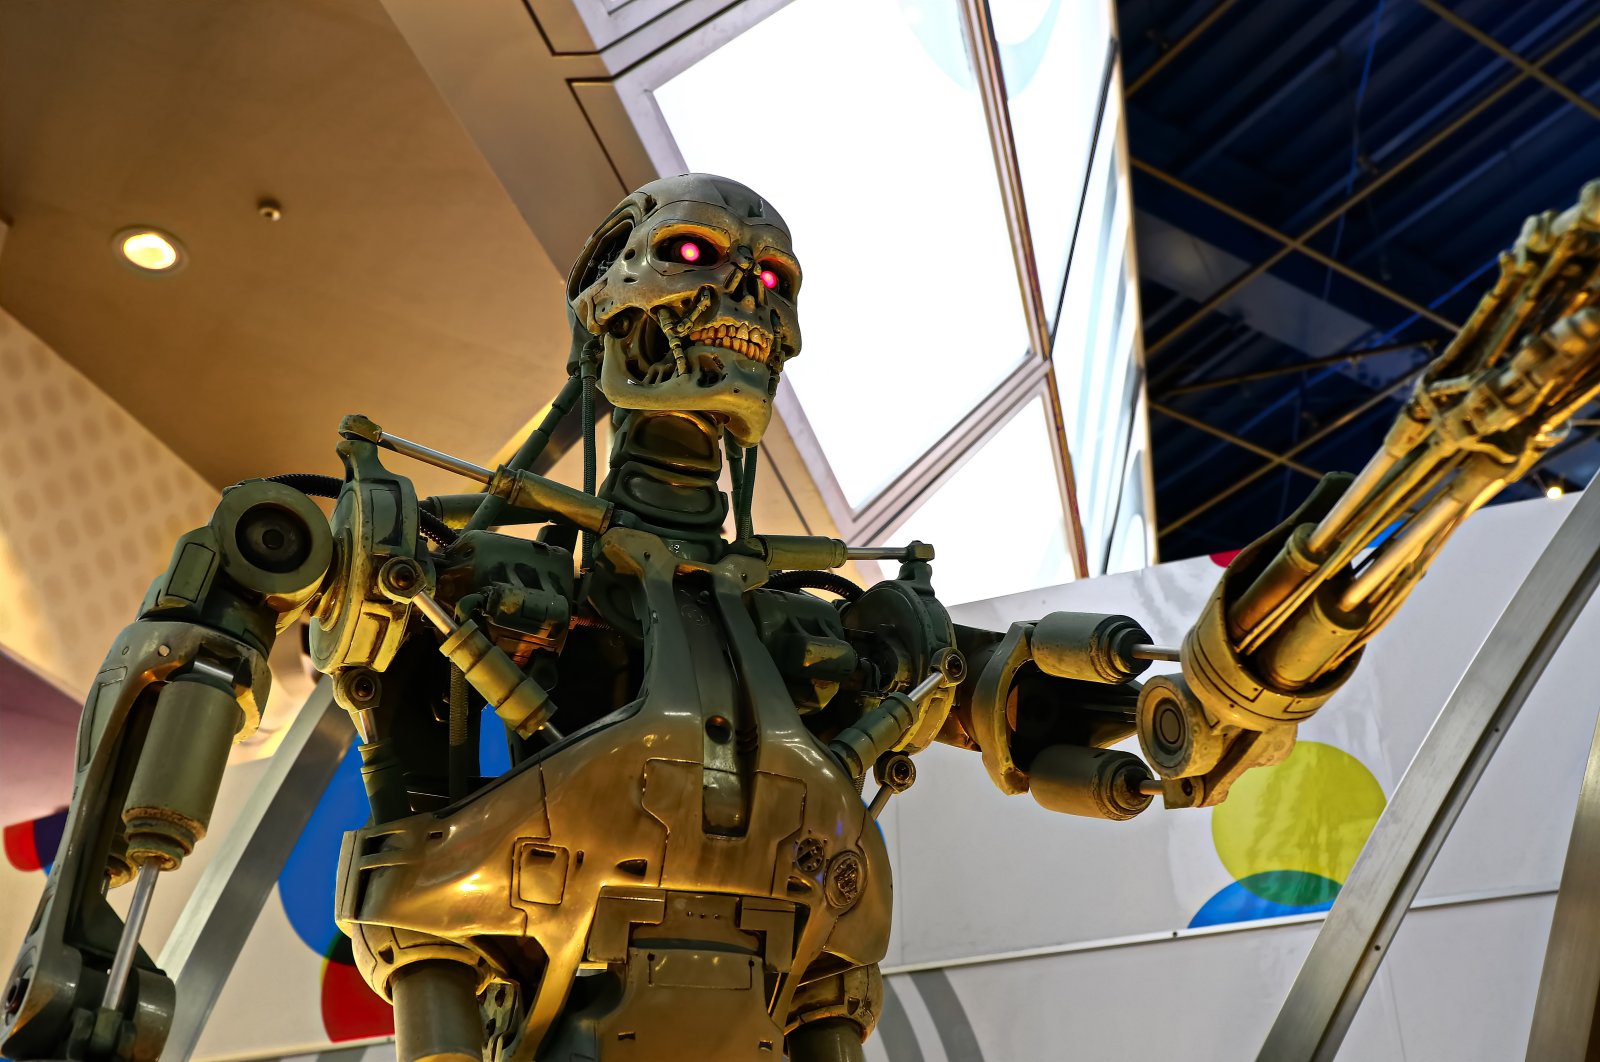 "The concept of an AI-dominated future has been vividly portrayed in the &#039;Terminator&#039; movie series, with the antagonist AI system known as Skynet." (Shutterstock Photo)